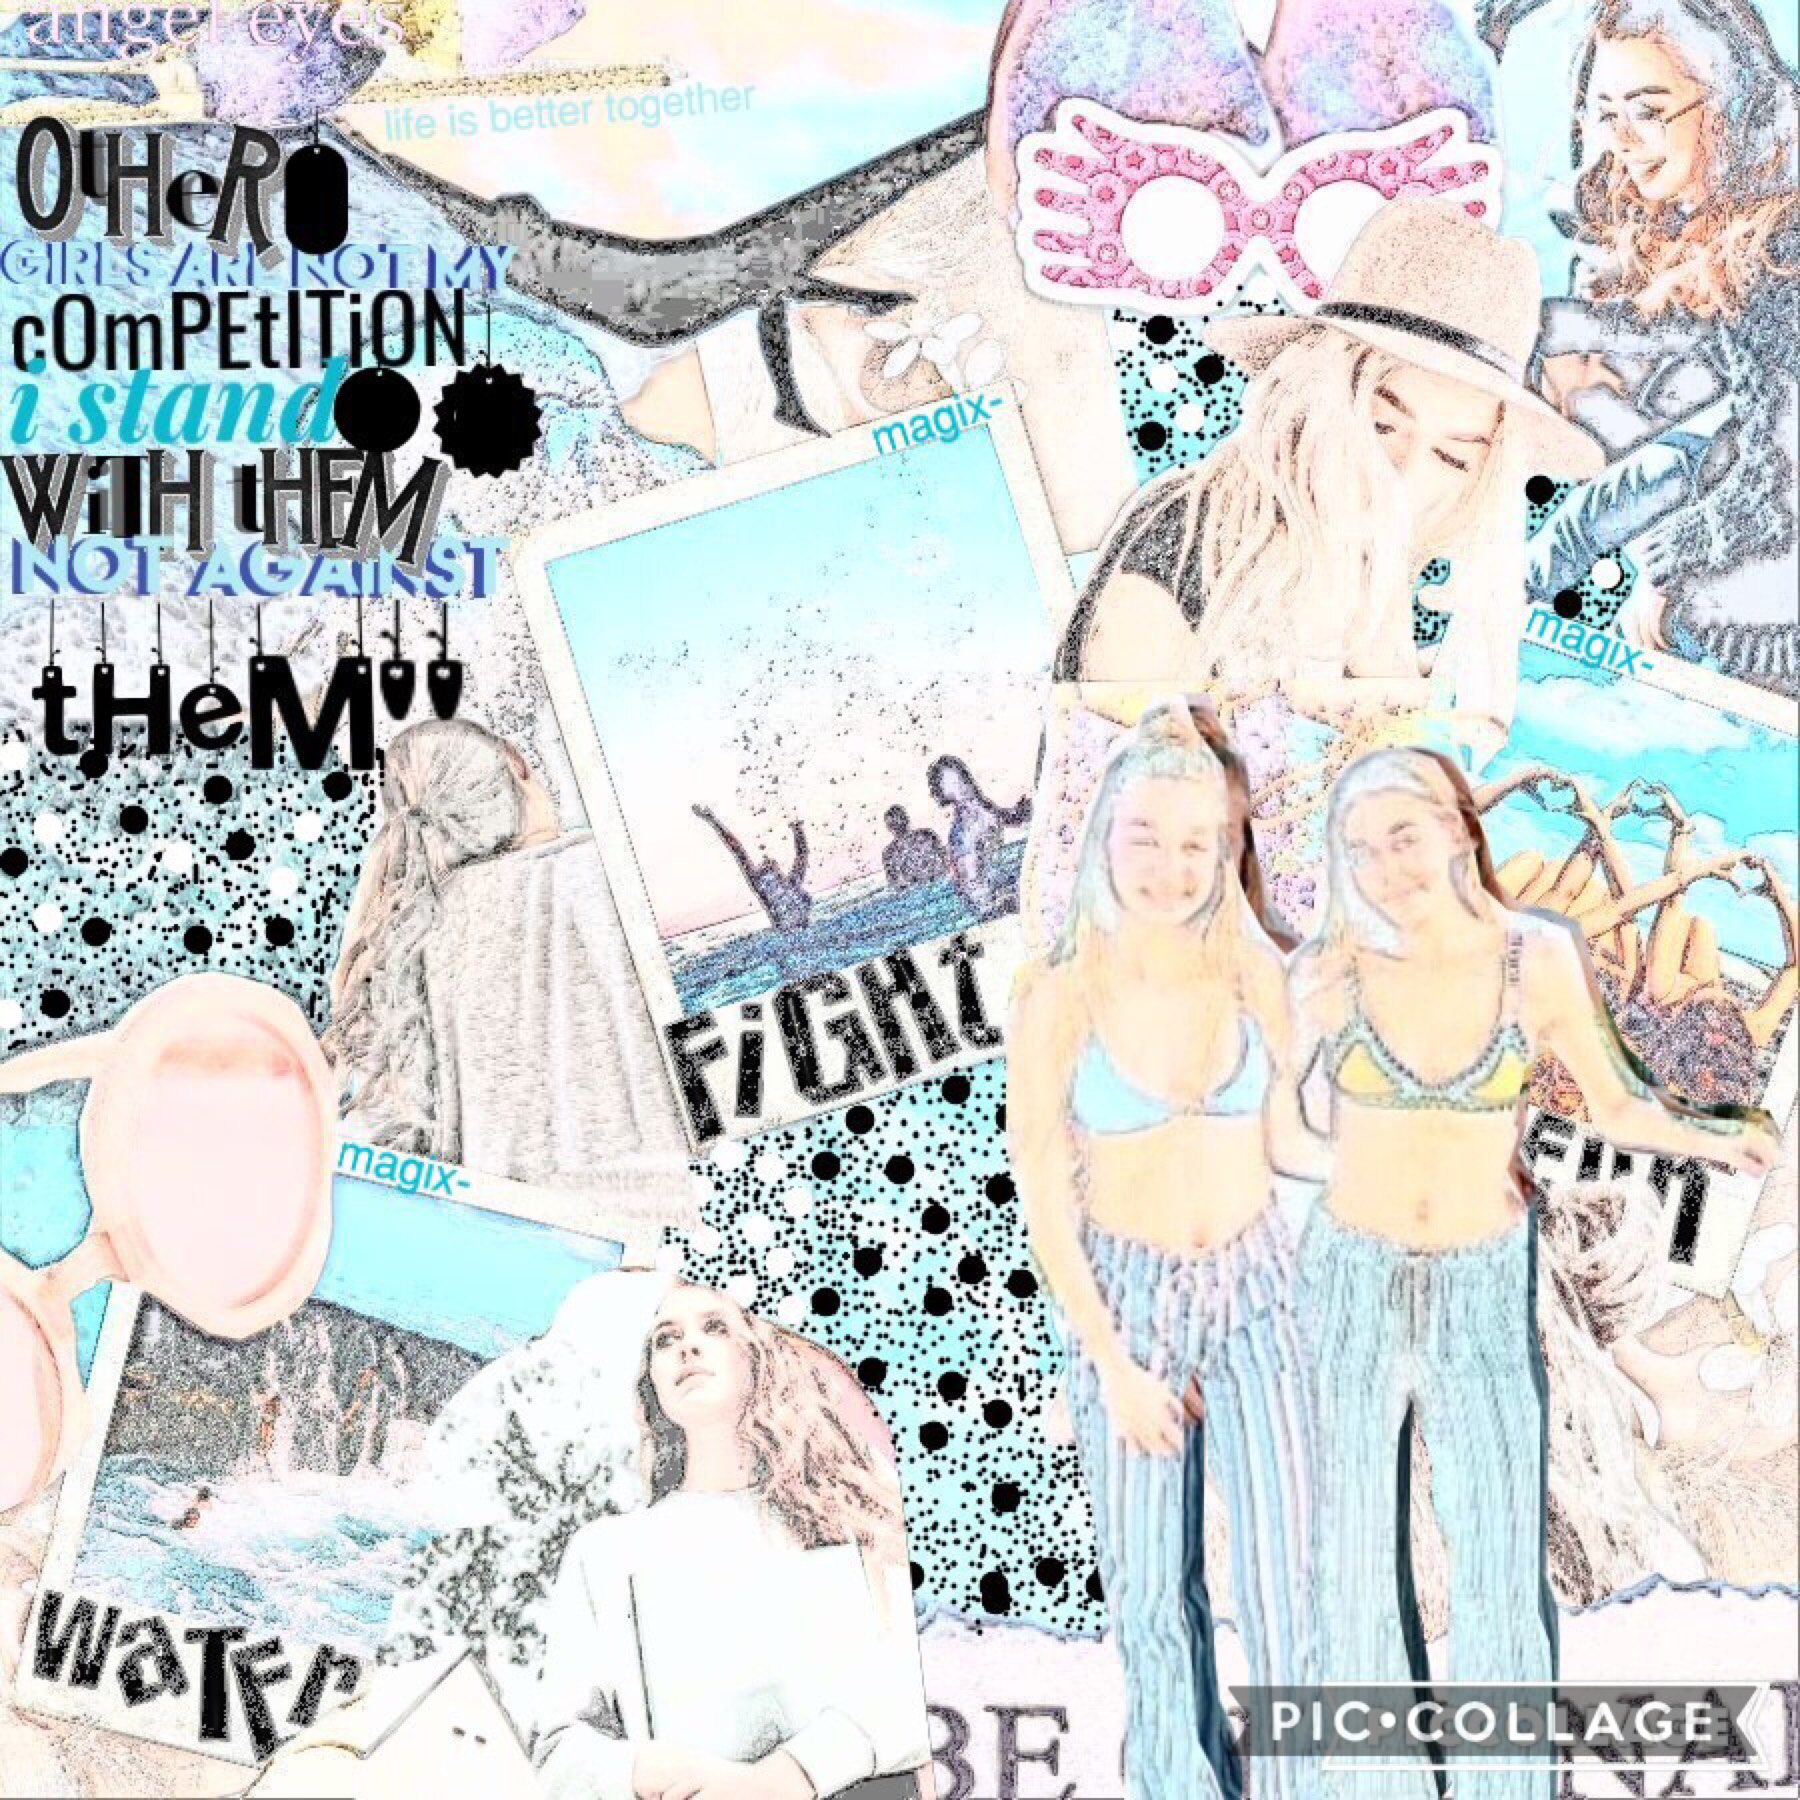 Hello FlelLow AliEnS 👽 (tap) 
To try and clear the confusion, this acc is still @magix- and this is her AMAZING collage and she’s replying to all your comments and WHAT NOT and I’m just posting for her 😂 I’m @-NEON_L1FE- btw ya know shameless self promo 
